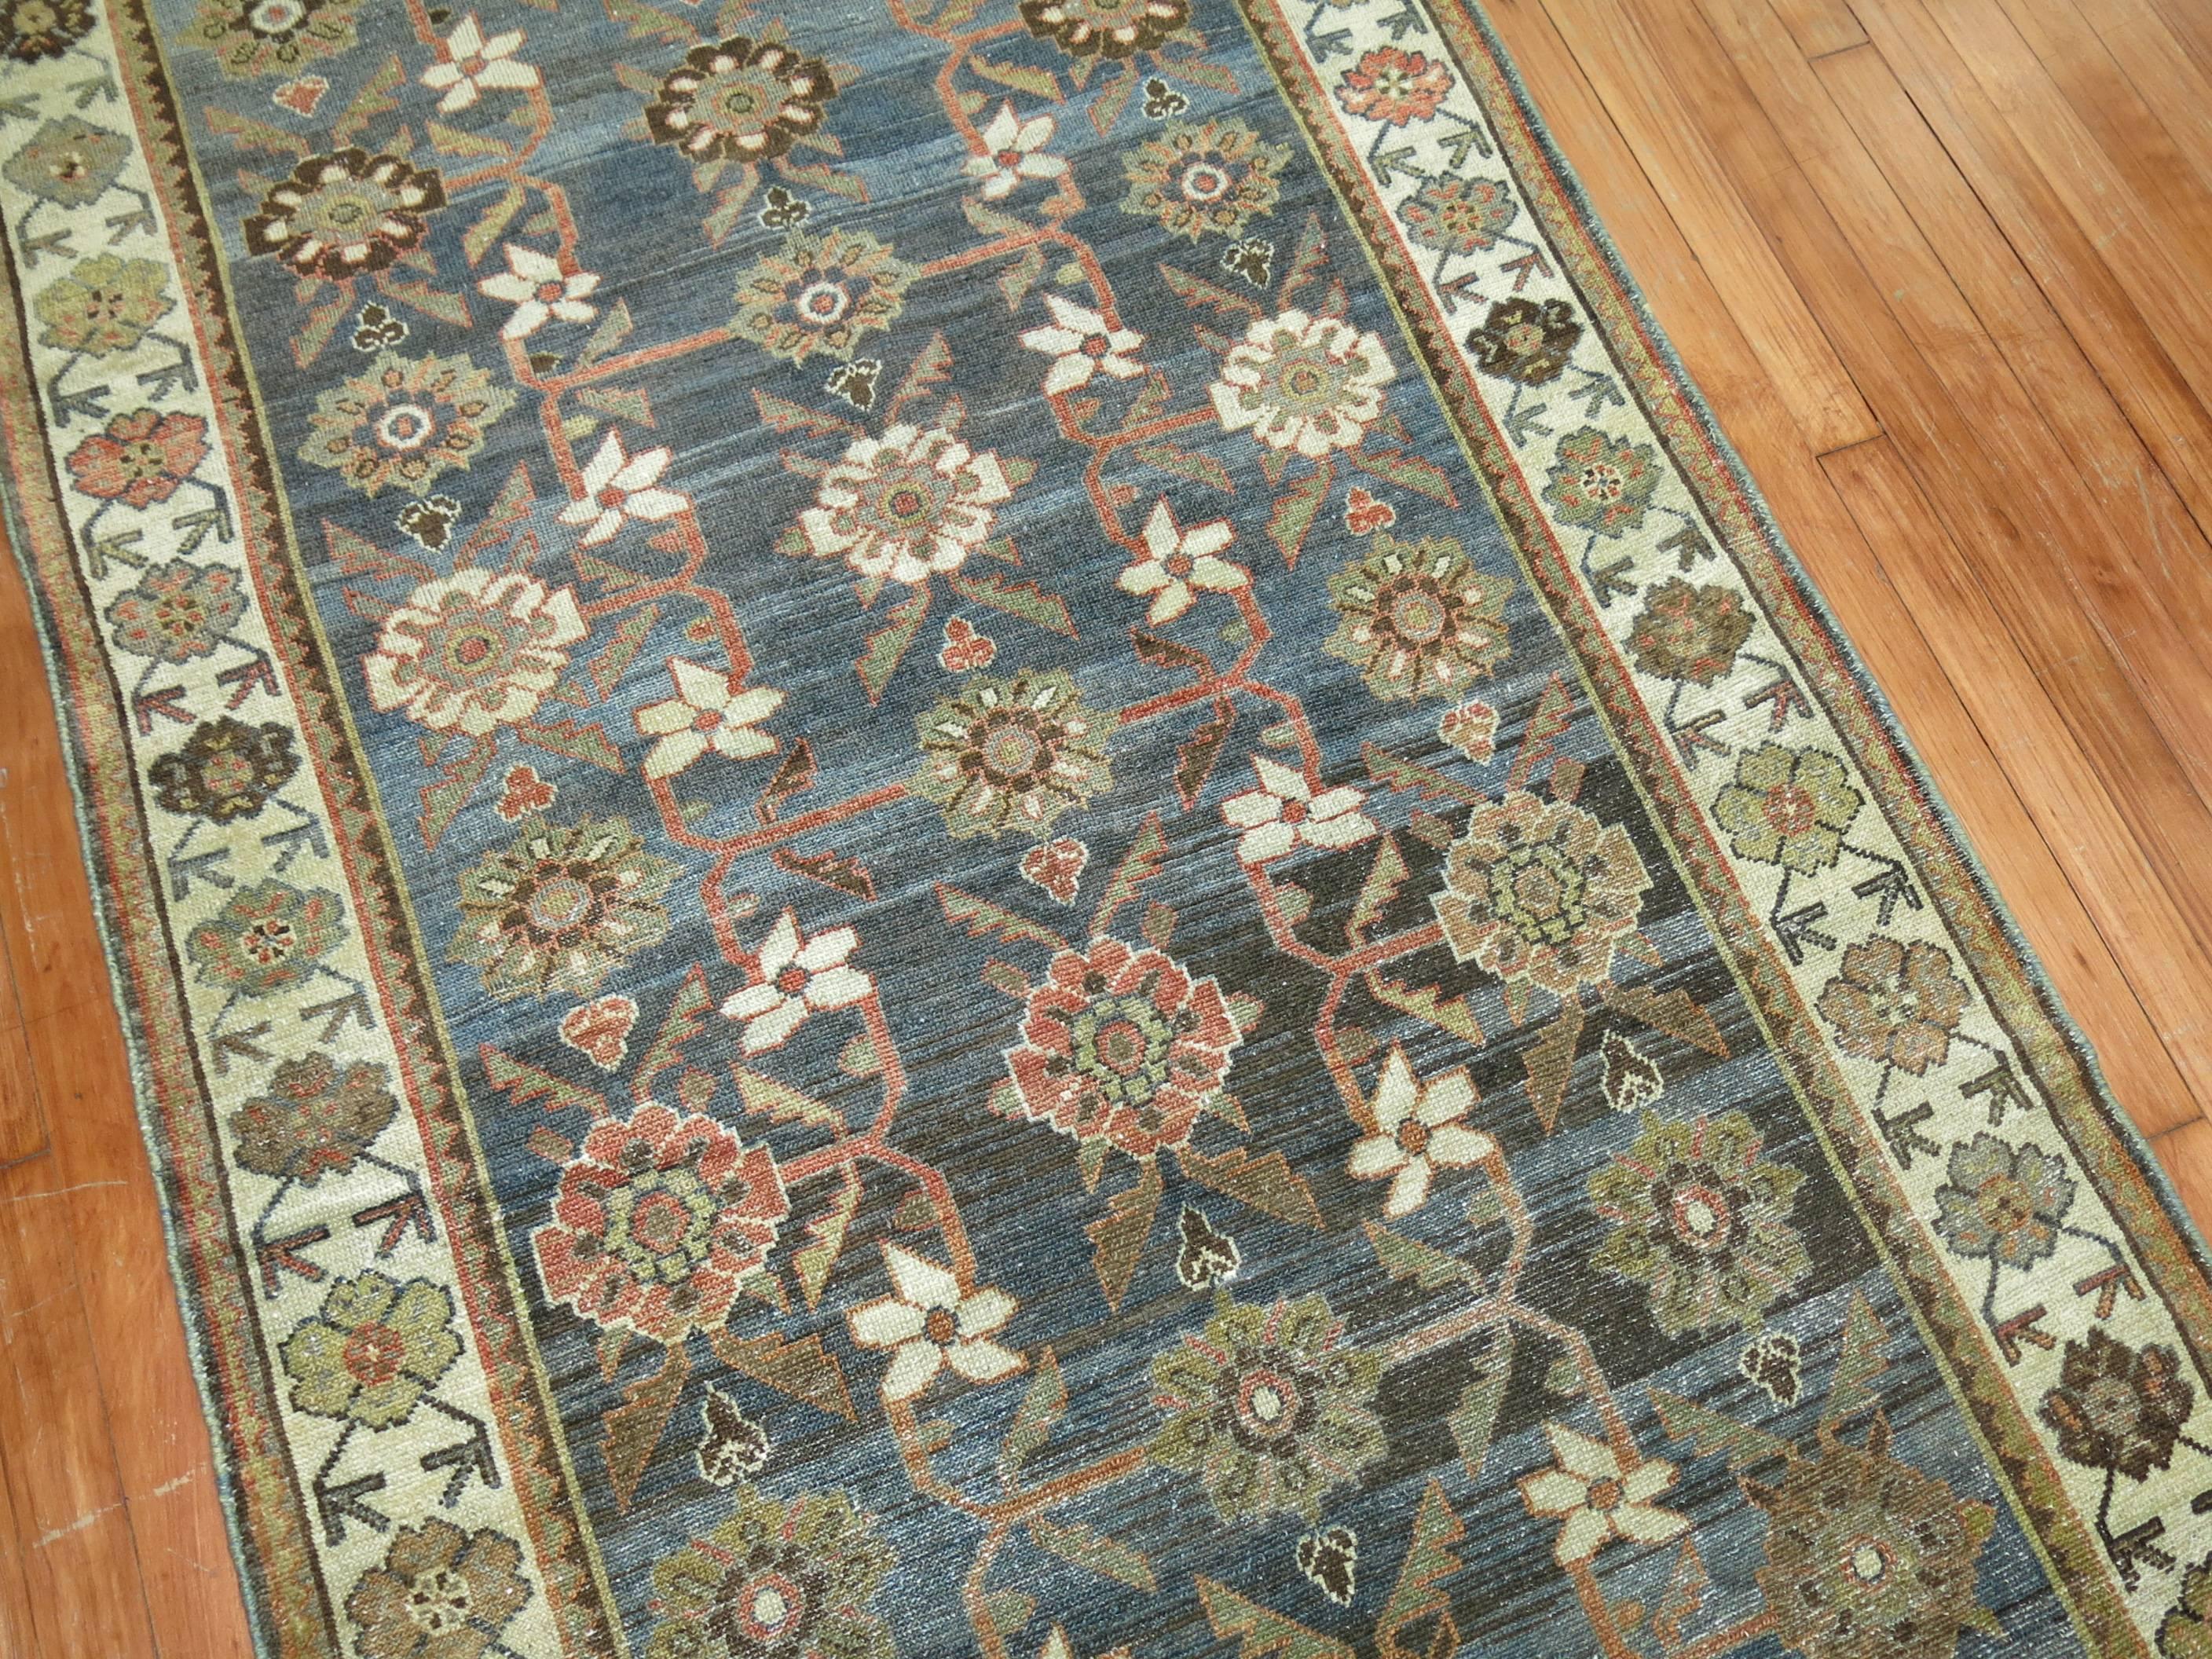 Stunning Persian Malayer Runner in earth tones from the 1920s. Pretty blues, gray, green and terracotta accents

Measures: 3'7” x 9'7”.